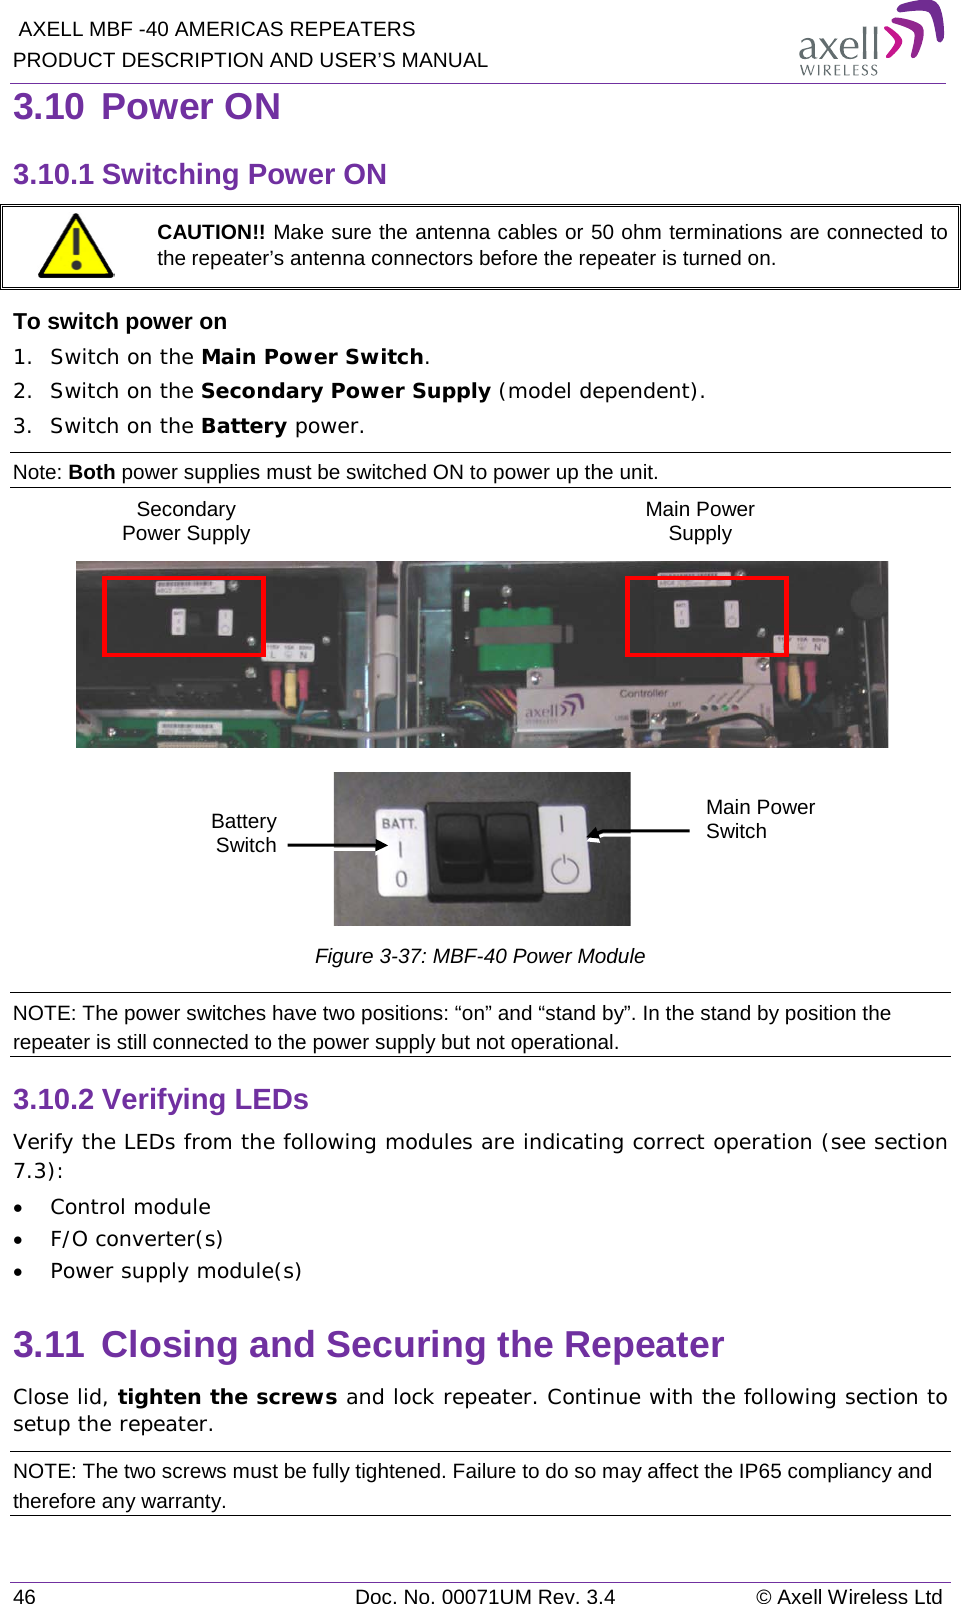  AXELL MBF -40 AMERICAS REPEATERS PRODUCT DESCRIPTION AND USER’S MANUAL 46 Doc. No. 00071UM Rev. 3.4 © Axell Wireless Ltd 3.10 Power ON 3.10.1 Switching Power ON  CAUTION!! Make sure the antenna cables or 50 ohm terminations are connected to the repeater’s antenna connectors before the repeater is turned on. To switch power on 1.  Switch on the Main Power Switch. 2.  Switch on the Secondary Power Supply (model dependent). 3.  Switch on the Battery power. Note: Both power supplies must be switched ON to power up the unit.      Figure  3-37: MBF-40 Power Module NOTE: The power switches have two positions: “on” and “stand by”. In the stand by position the repeater is still connected to the power supply but not operational. 3.10.2 Verifying LEDs Verify the LEDs from the following modules are indicating correct operation (see section  7.3): • Control module • F/O converter(s) • Power supply module(s) 3.11 Closing and Securing the Repeater Close lid, tighten the screws and lock repeater. Continue with the following section to setup the repeater. NOTE: The two screws must be fully tightened. Failure to do so may affect the IP65 compliancy and therefore any warranty. Main Power Switch Battery Switch Secondary Power Supply  Main Power Supply  